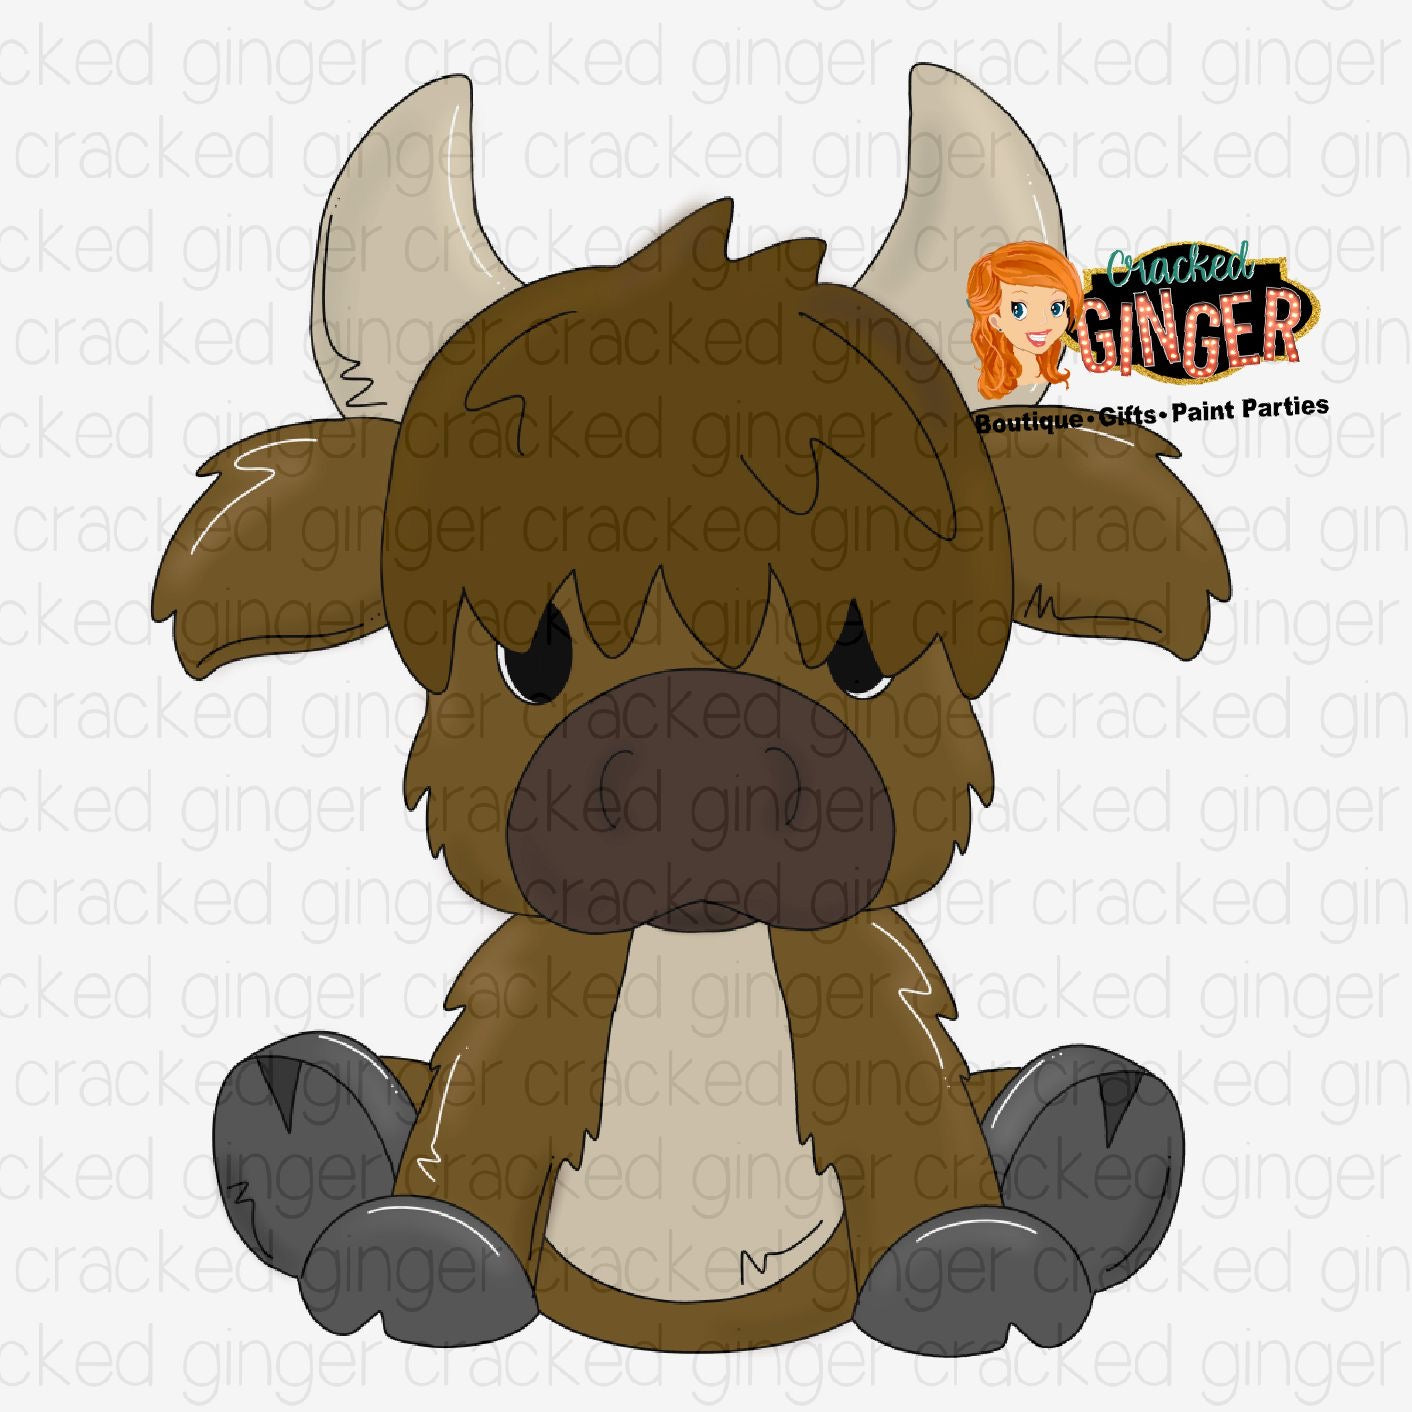 Highland cow template â cracked ginger